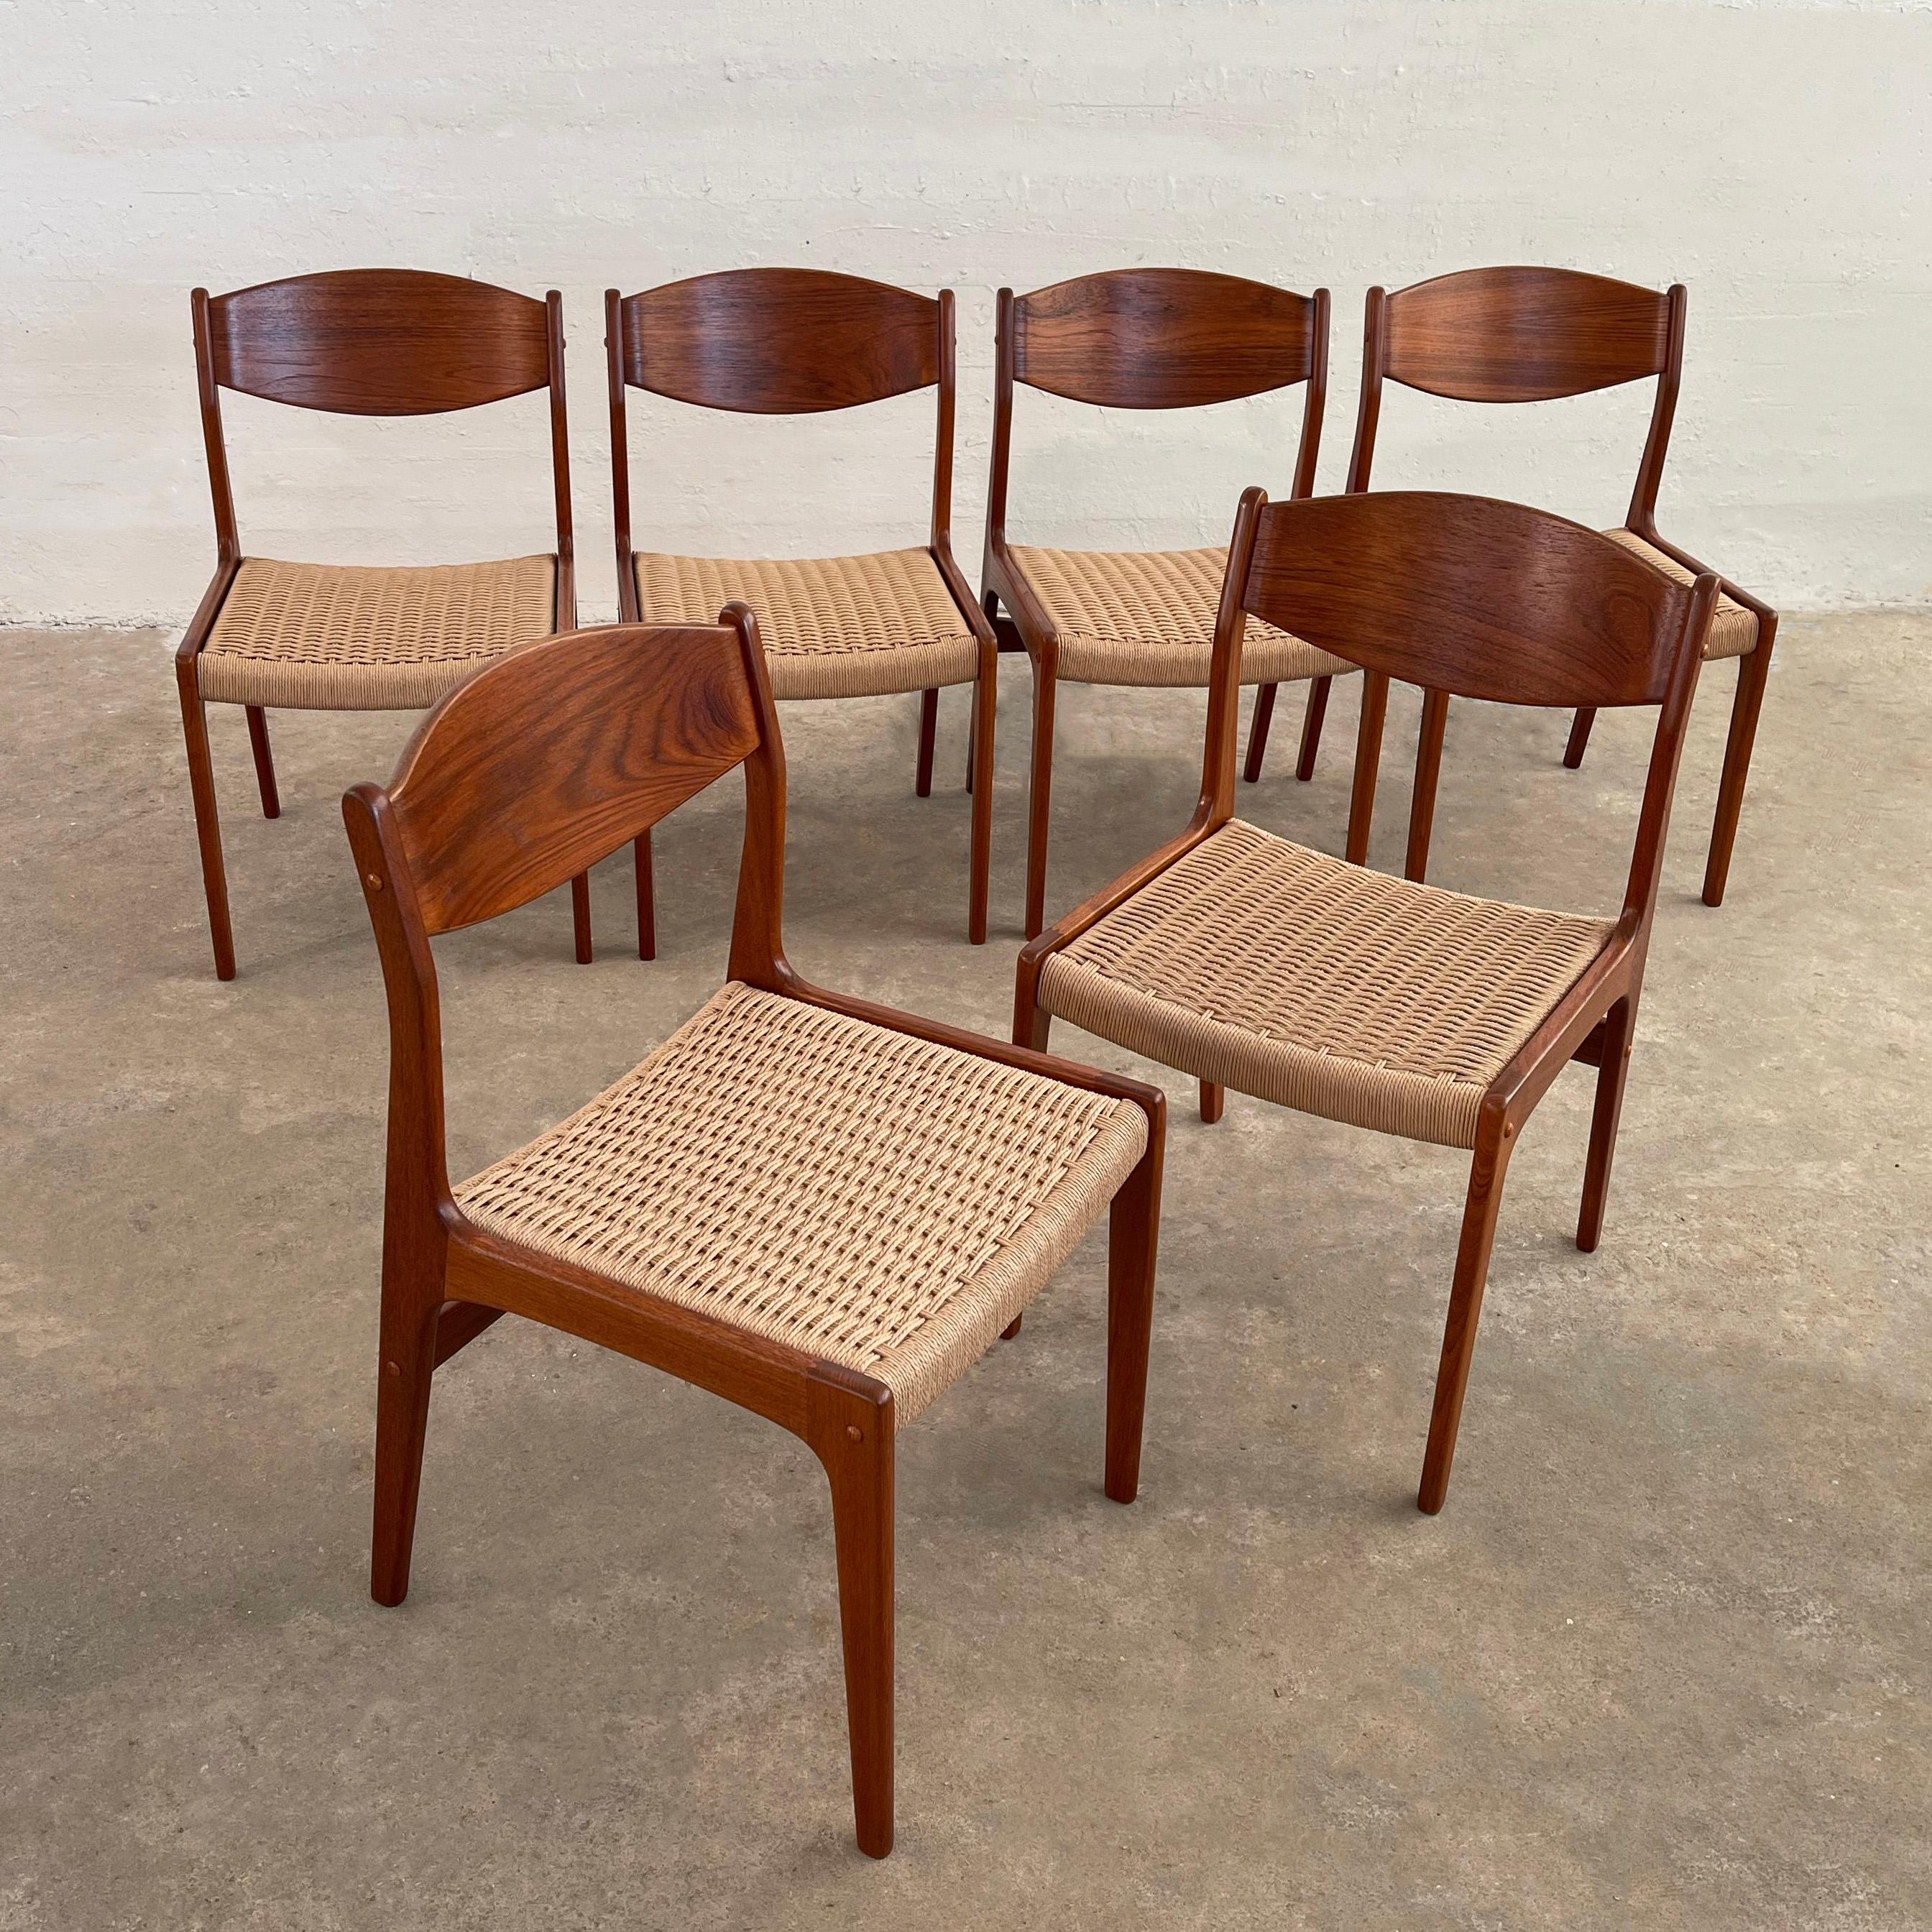 Stunning set of six Scandinavian modern, dining side chairs feature elegantly sculpted teak frames with contoured backs and newly woven rope seats. 